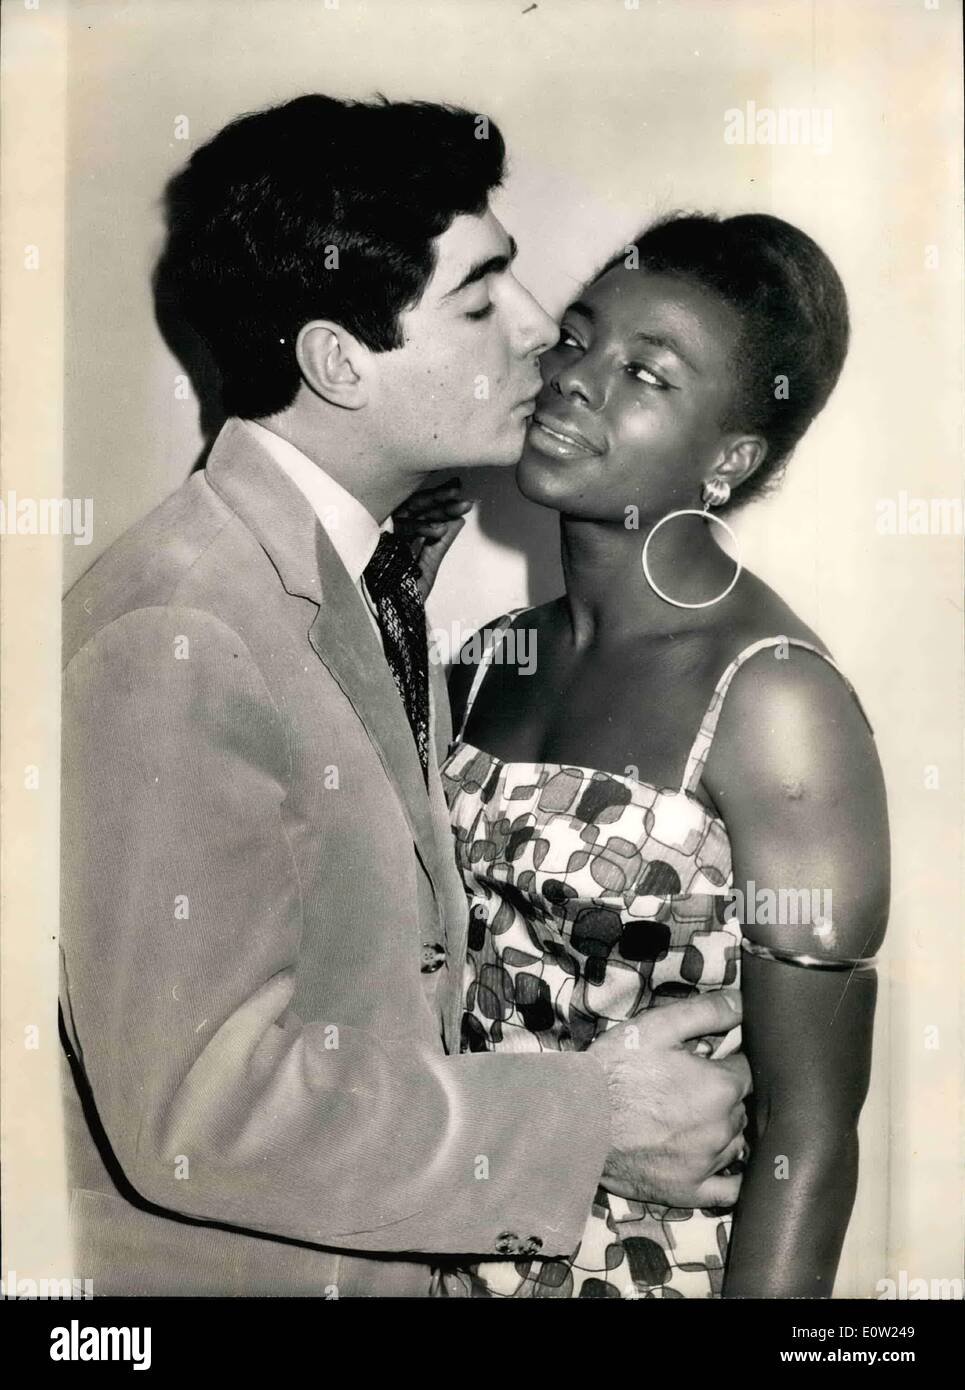 Feb. 02, 1961 - Black actress makes a hot on a Paris Theater: Lydia Ewande, a black actress, holds one of the title roles in ''les enfants De Coeur'', a comedy now running at the Theater Des Capucines, Paris. Co-starring with her is the young French actor Claude Rollet. Photo shows Lydia Awande and Claude Rollet in a scene of the play. Stock Photo